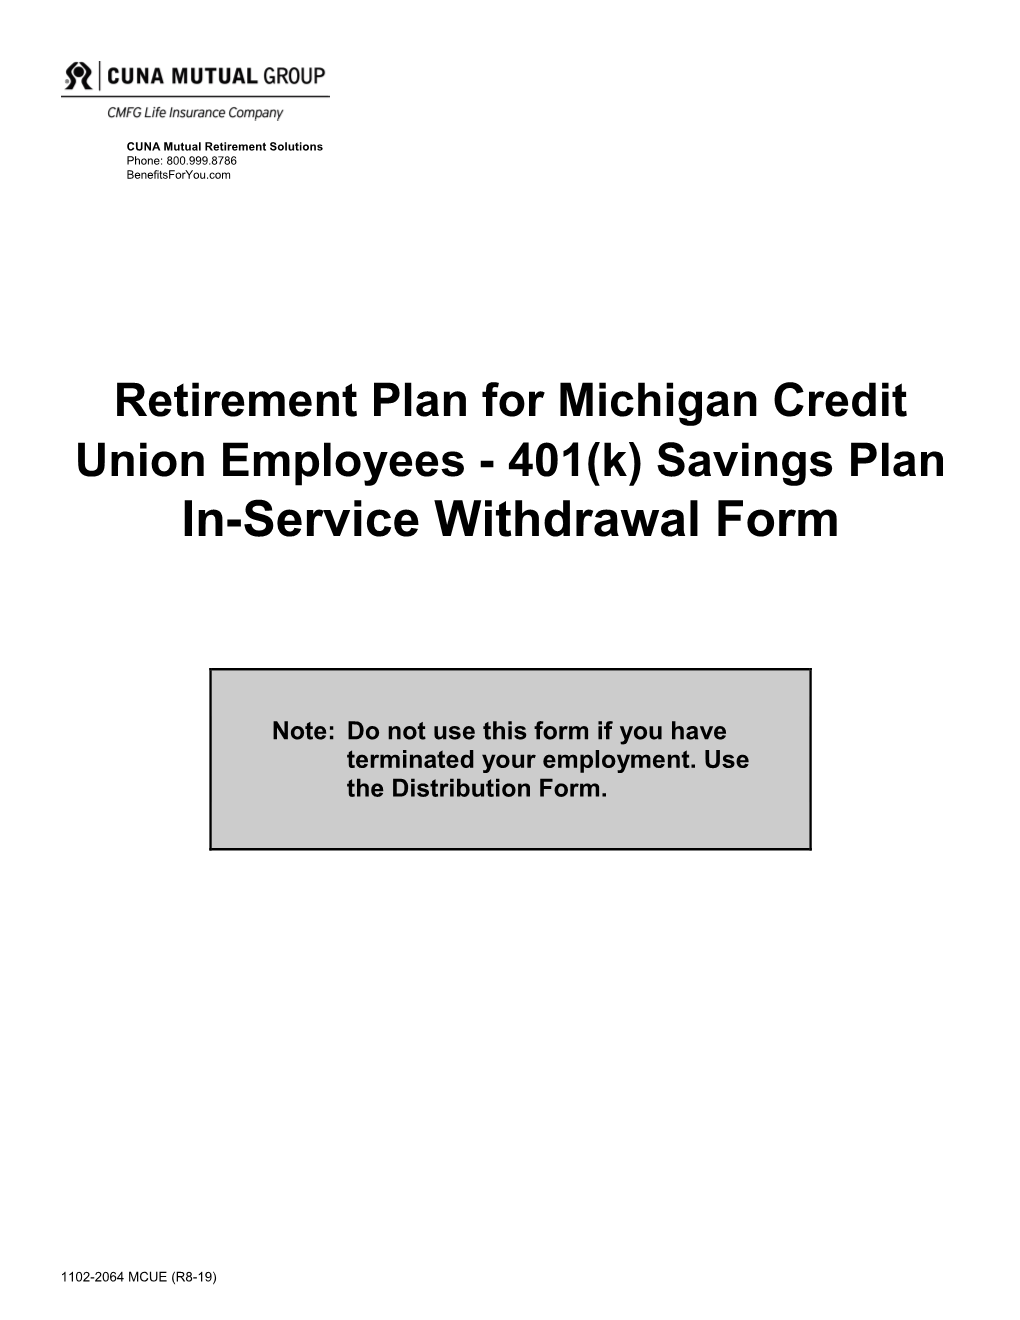 Retirement Plan for Michigan Credit Union Employees - 401(K) Savings Plan In-Service Withdrawal Form